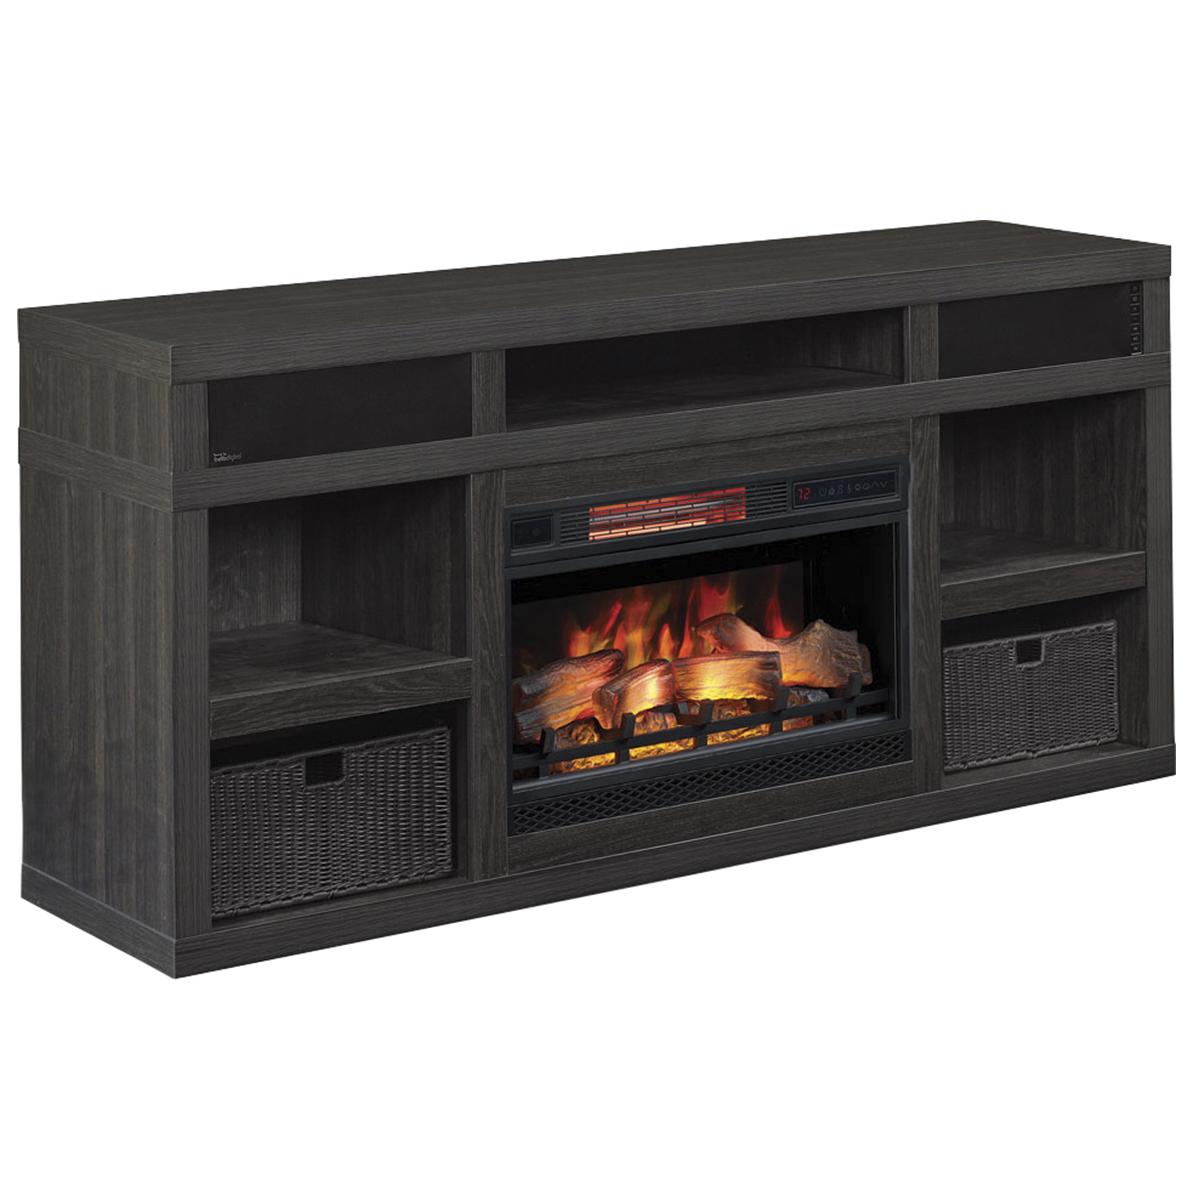 Fireplace Tv Stand with Bluetooth Speakers Inspirational Fabio Flames Greatlin 64" Tv Stand In Black Walnut